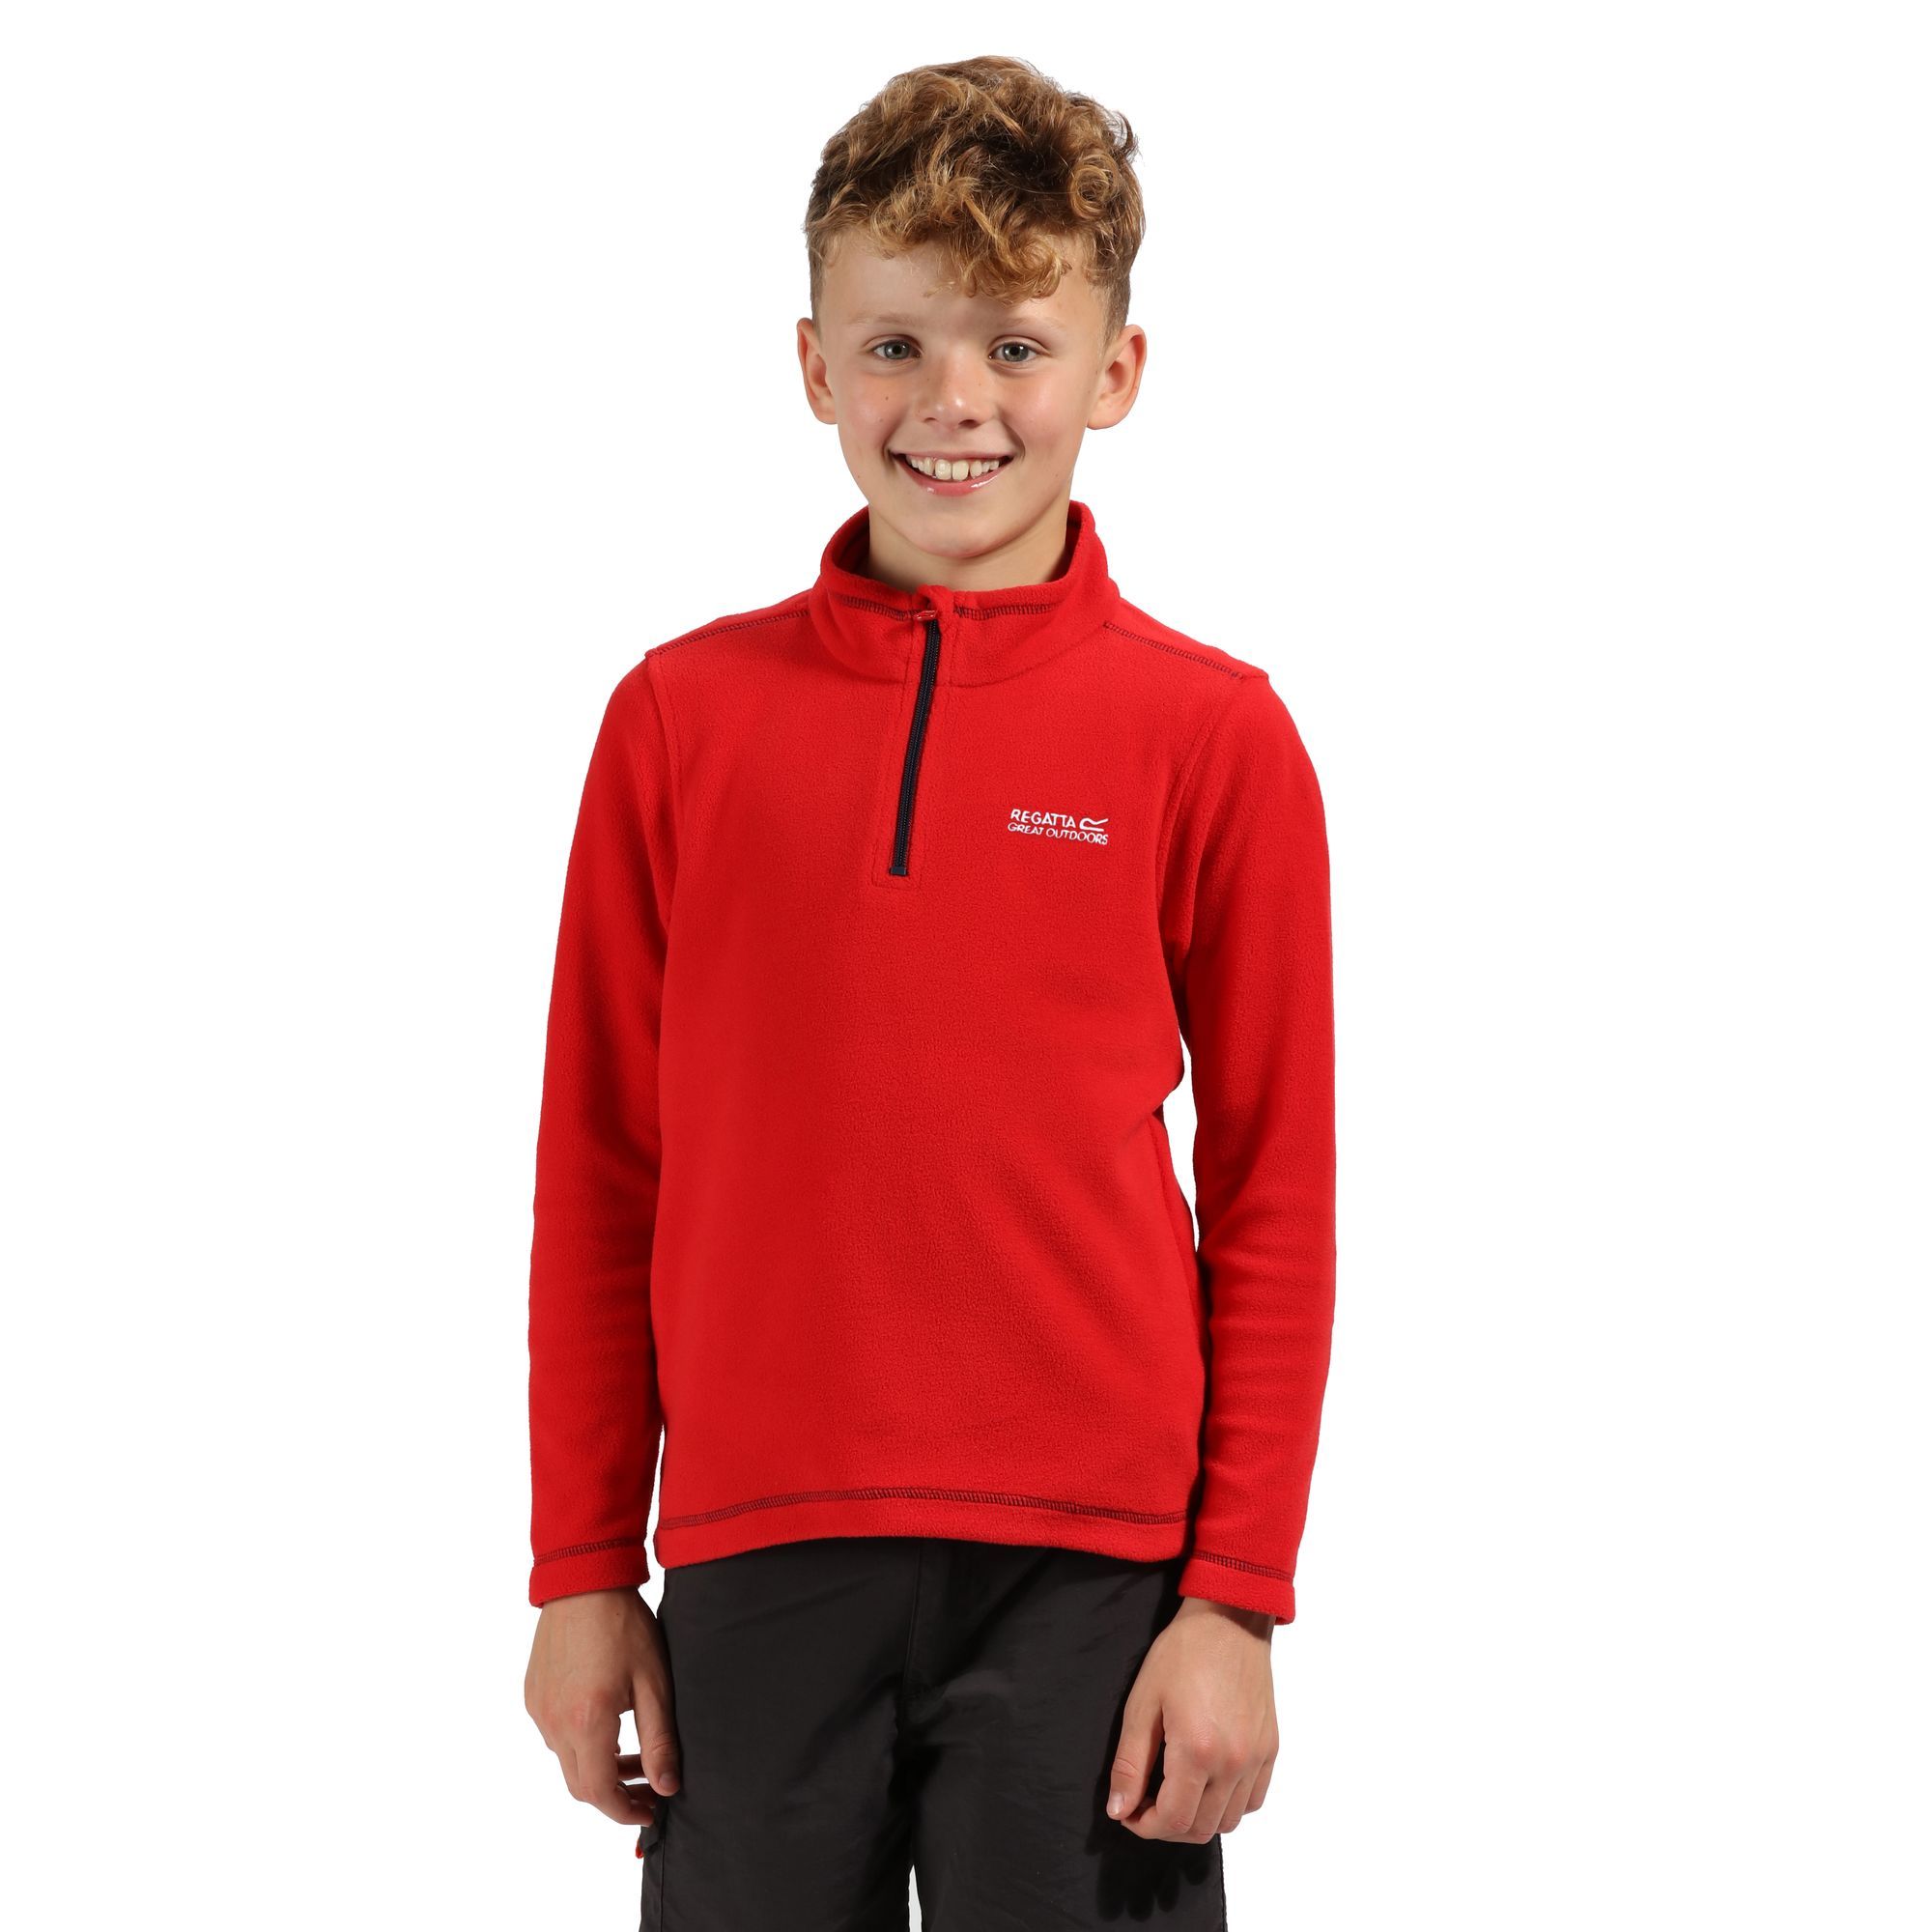 170gsm Symmetry fleece. 1 side brushed, 1 side anti pill. 100% Polyester. Regatta Kids Sizing (chest approx): 2 Years (53-55cm), 3-4 Years (55-57cm), 5-6 Years (59-61cm), 7-8 Years (63-67cm), 9-10 Years (69-73cm), 11-12 Years (75-79cm), 32 (79-83cm), 34 (83-85cm).